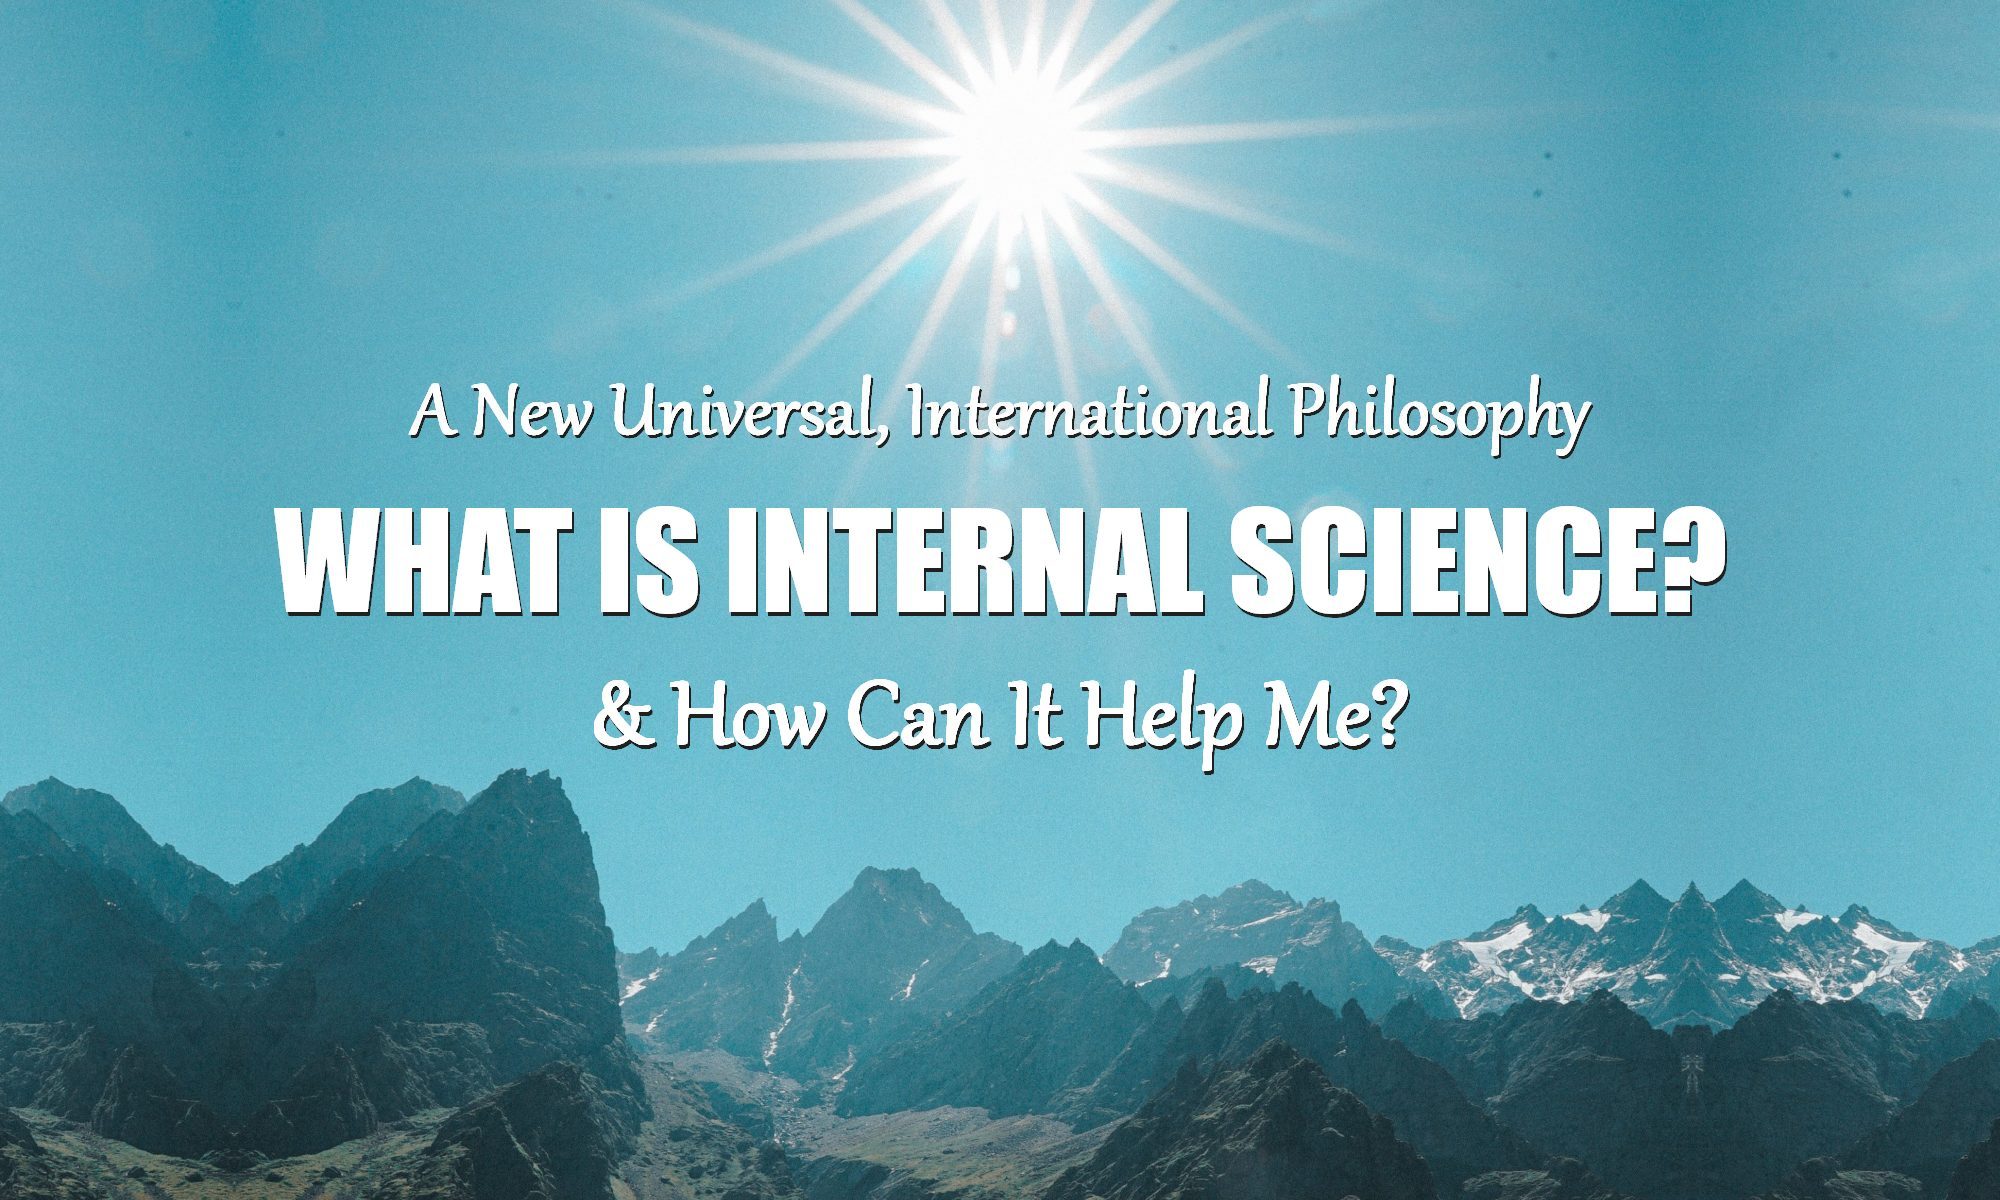 What is a New Scientist, Internal Science & Intuition? A New Universal, International Philosophy By William Eastwood.